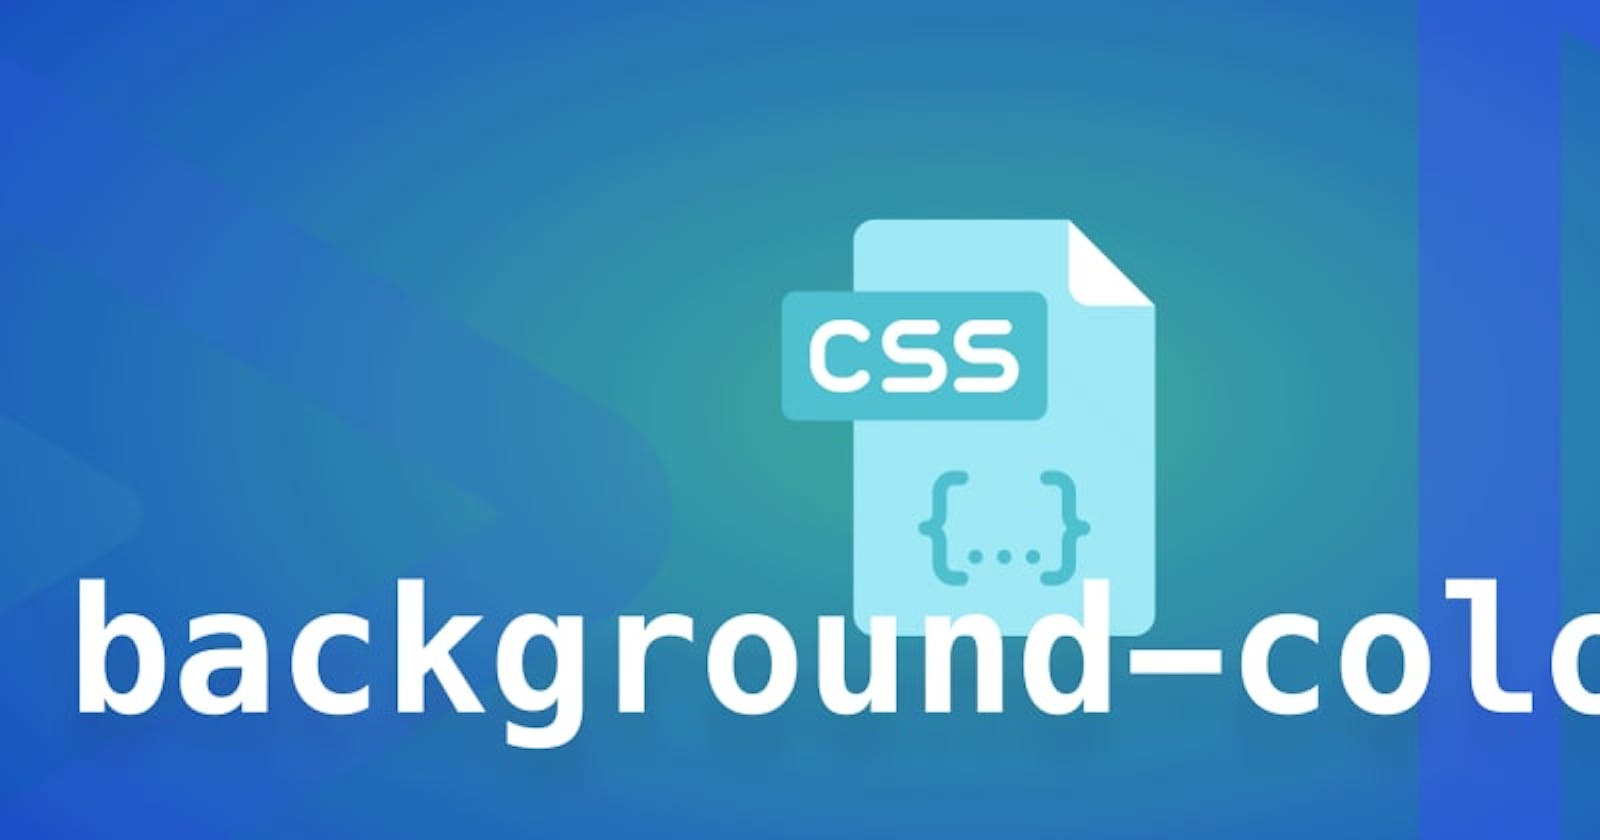 Using the CSS background-color property to debug web pages